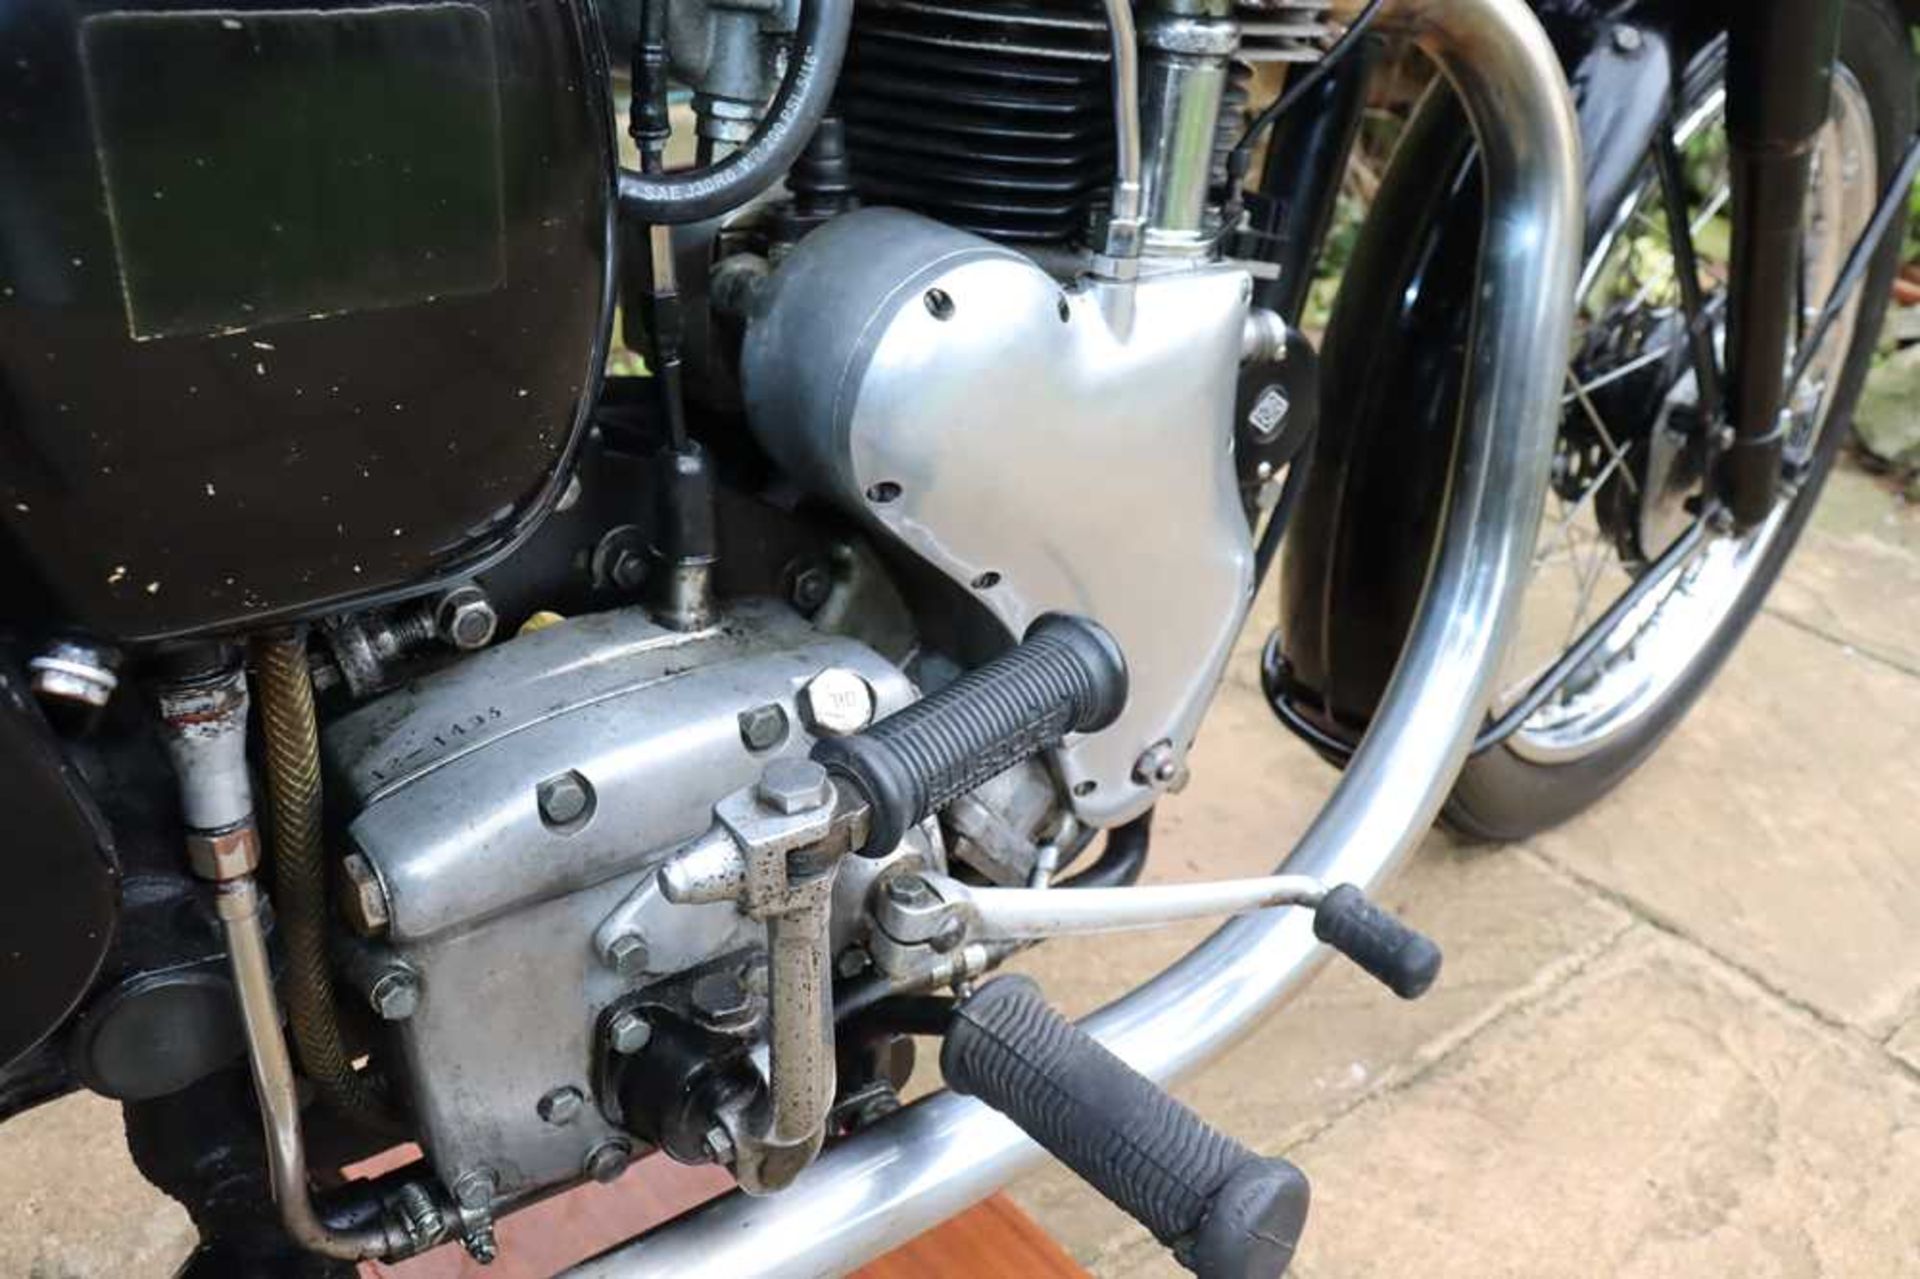 1954 Velocette MSS Fitted with an Alton electric starter kit - Image 29 of 41